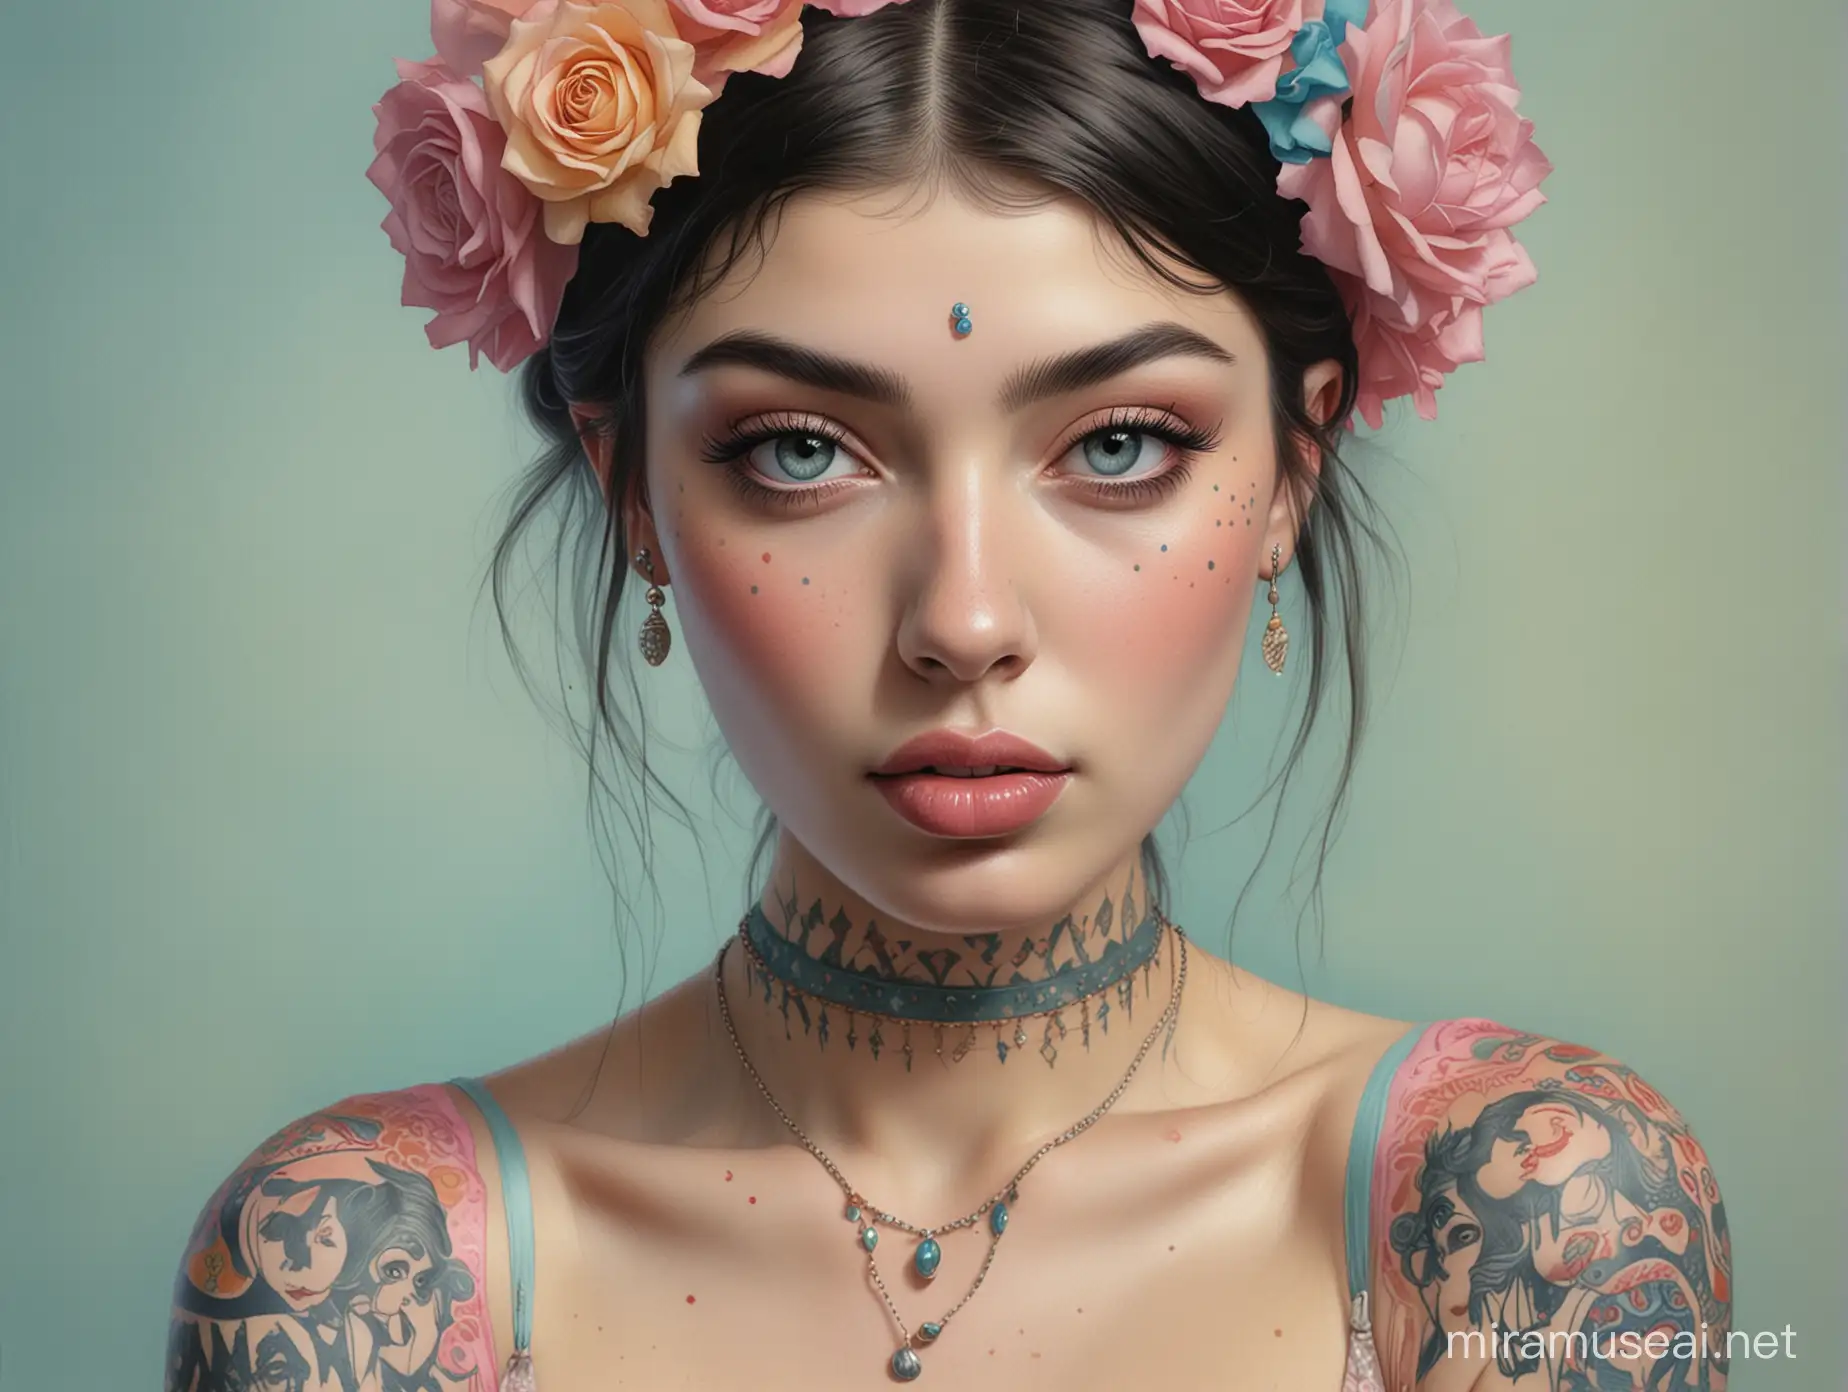 Exotic Hyperrealistic Watercolor Portrait of Circus Girl Camila Morrone Covered in Tattoos 1930s